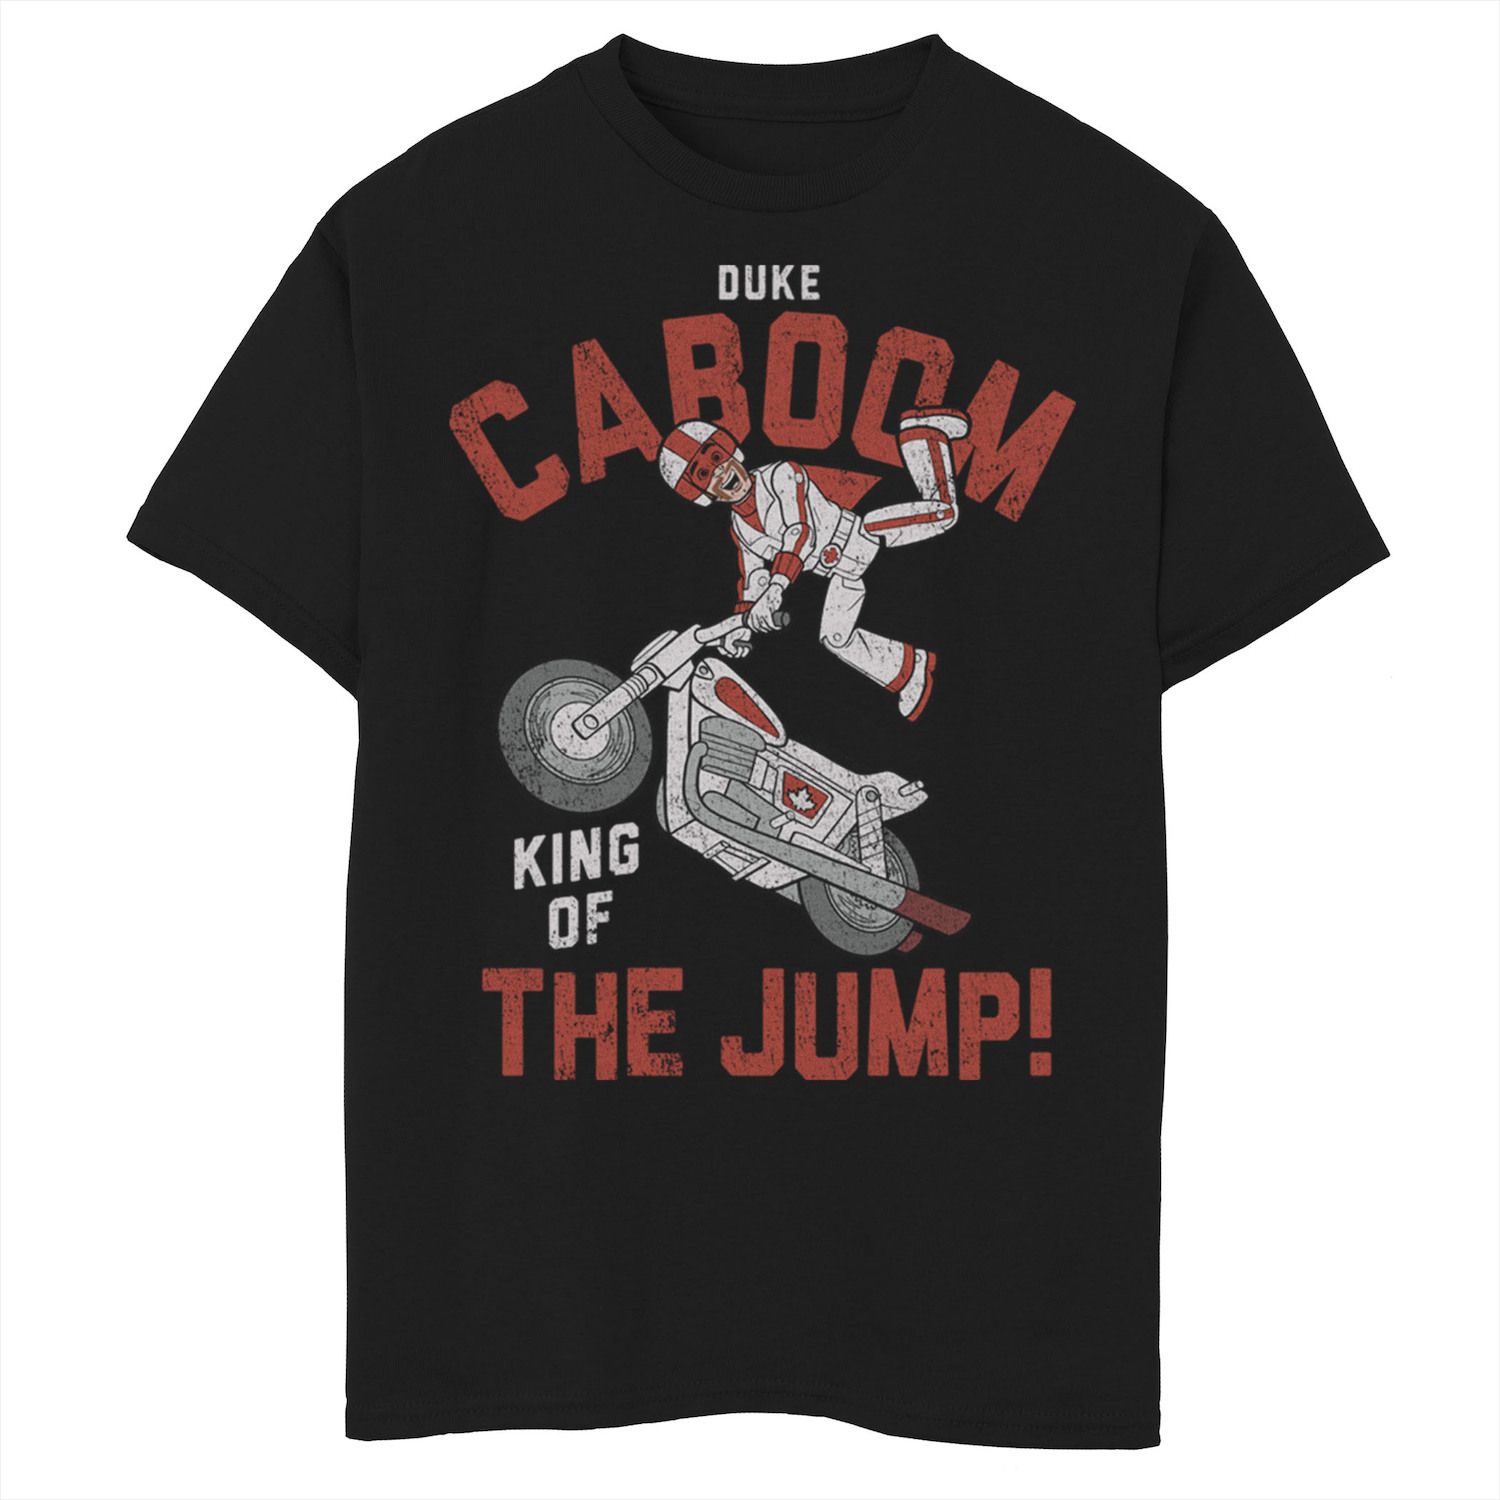 Image for Disney / Pixar Toy Story Boys 8-20 Duke Caboom King Of The Jump Graphic Tee at Kohl's.